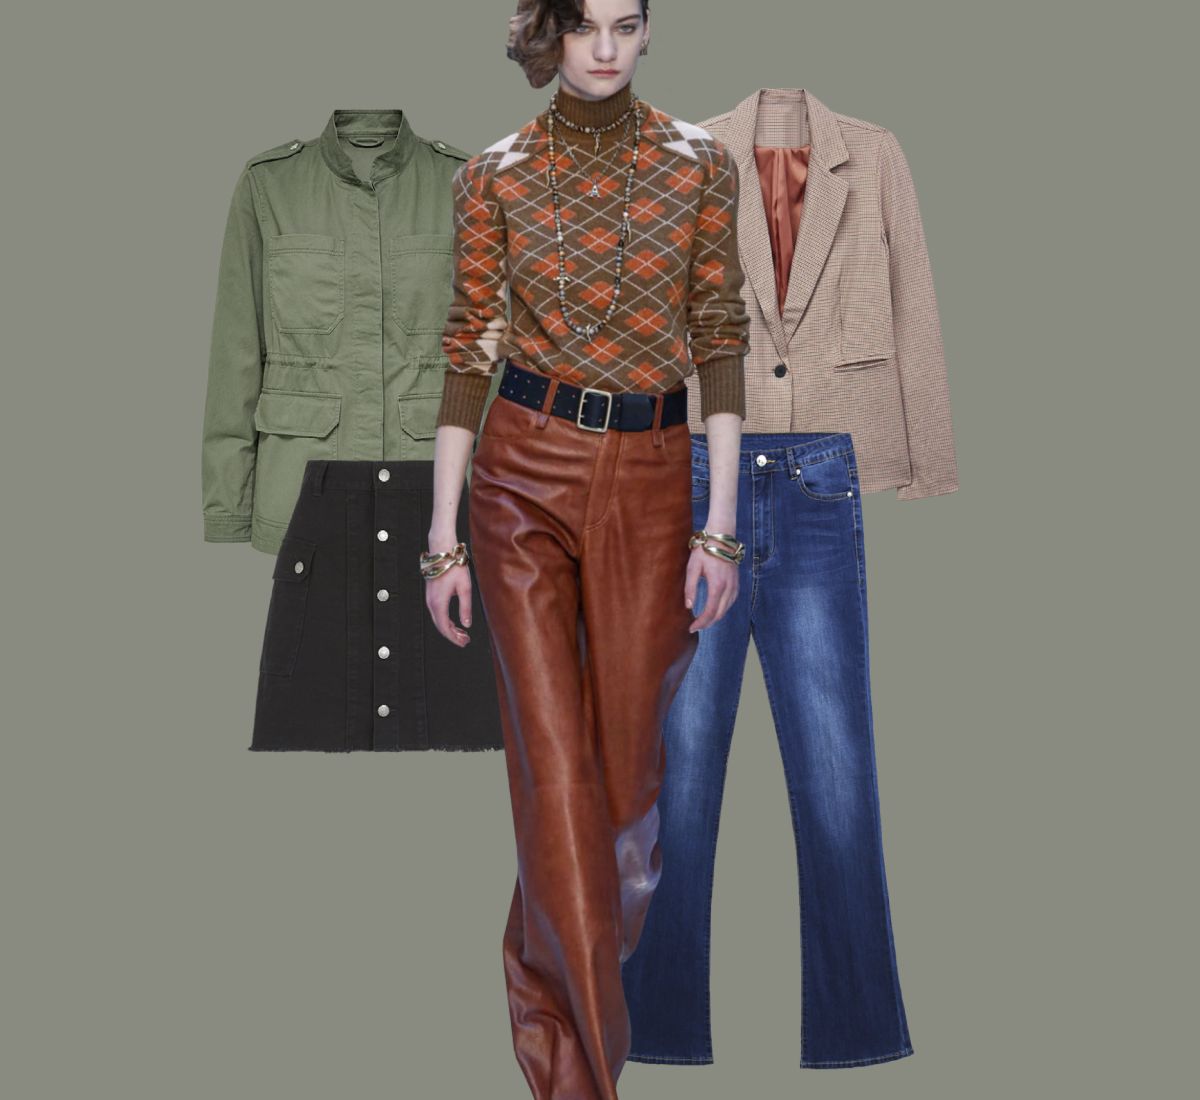 Autumn/Winter 2020 Trends: Your 70s’ Style